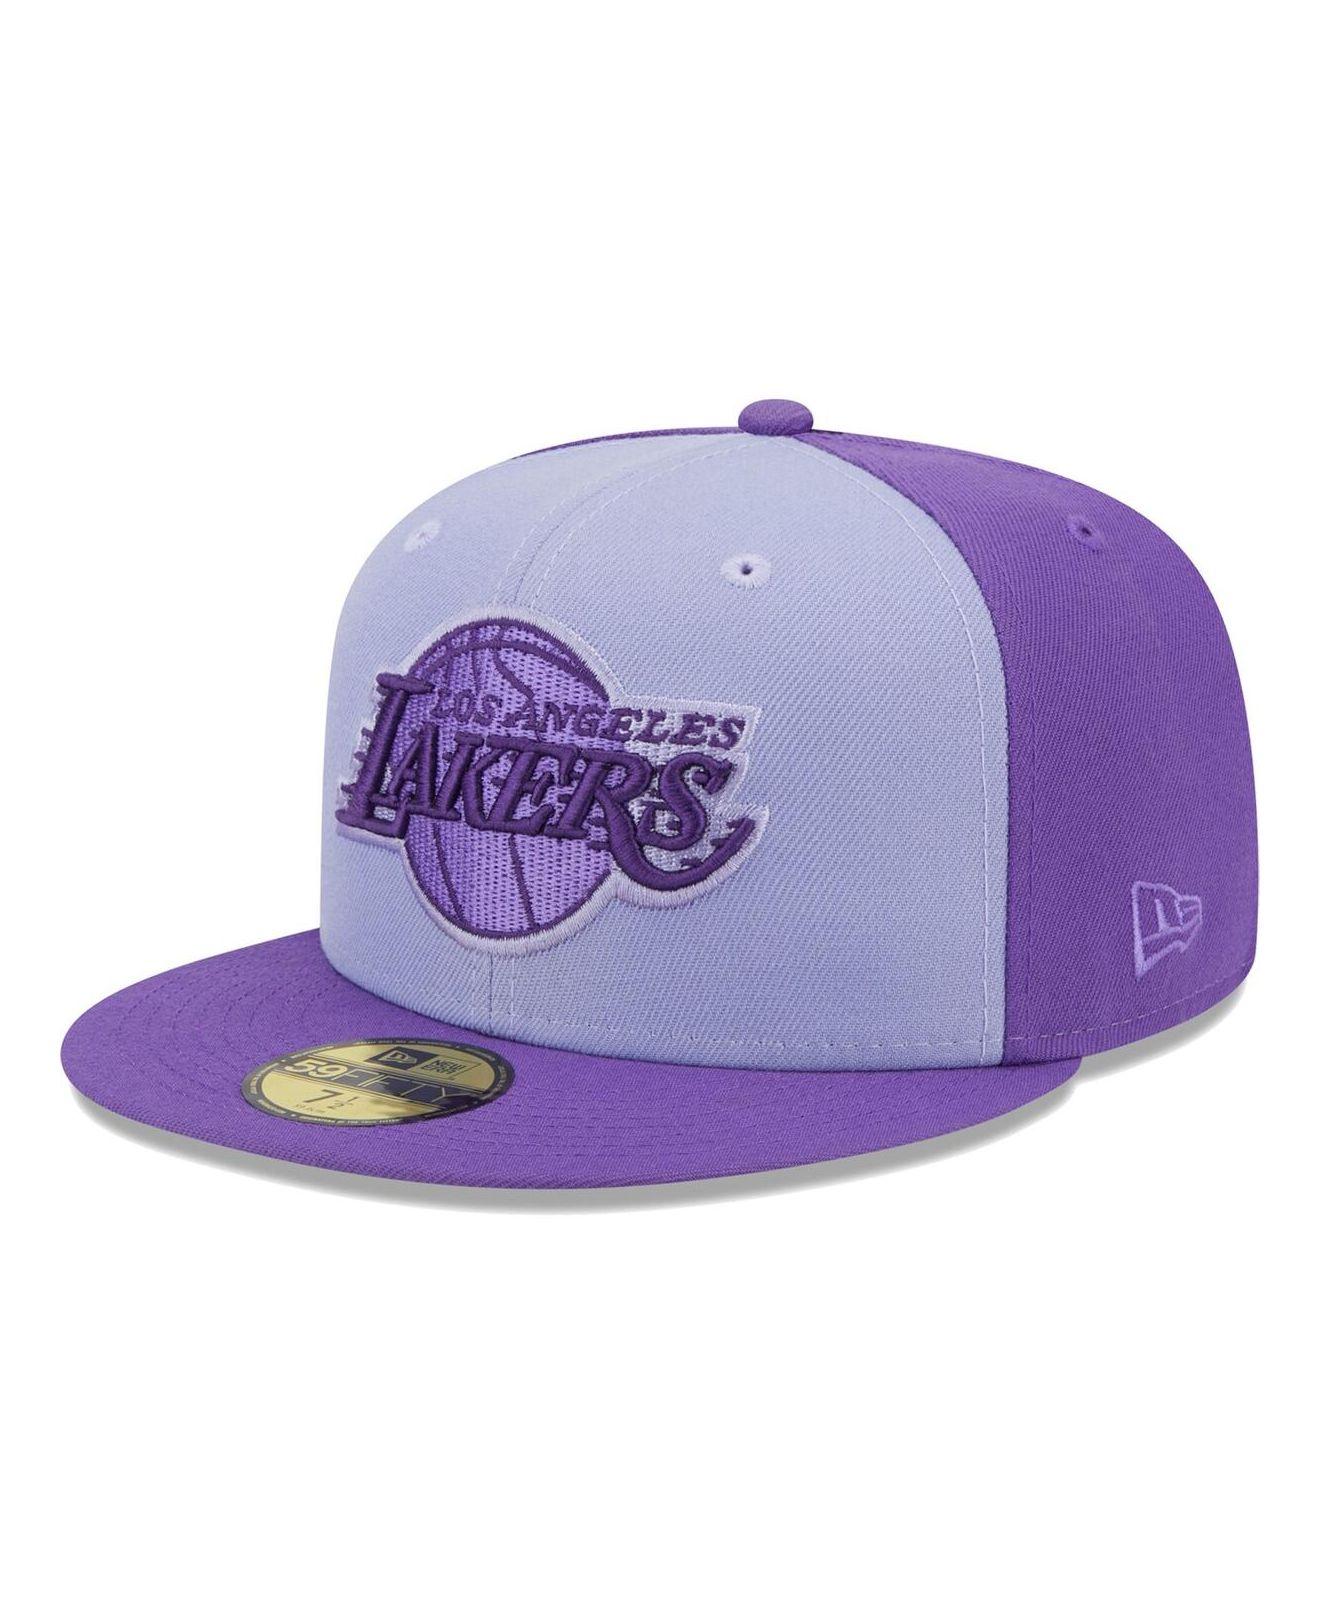 New Era Purple Florida Marlins Vice 59FIFTY Fitted Hat